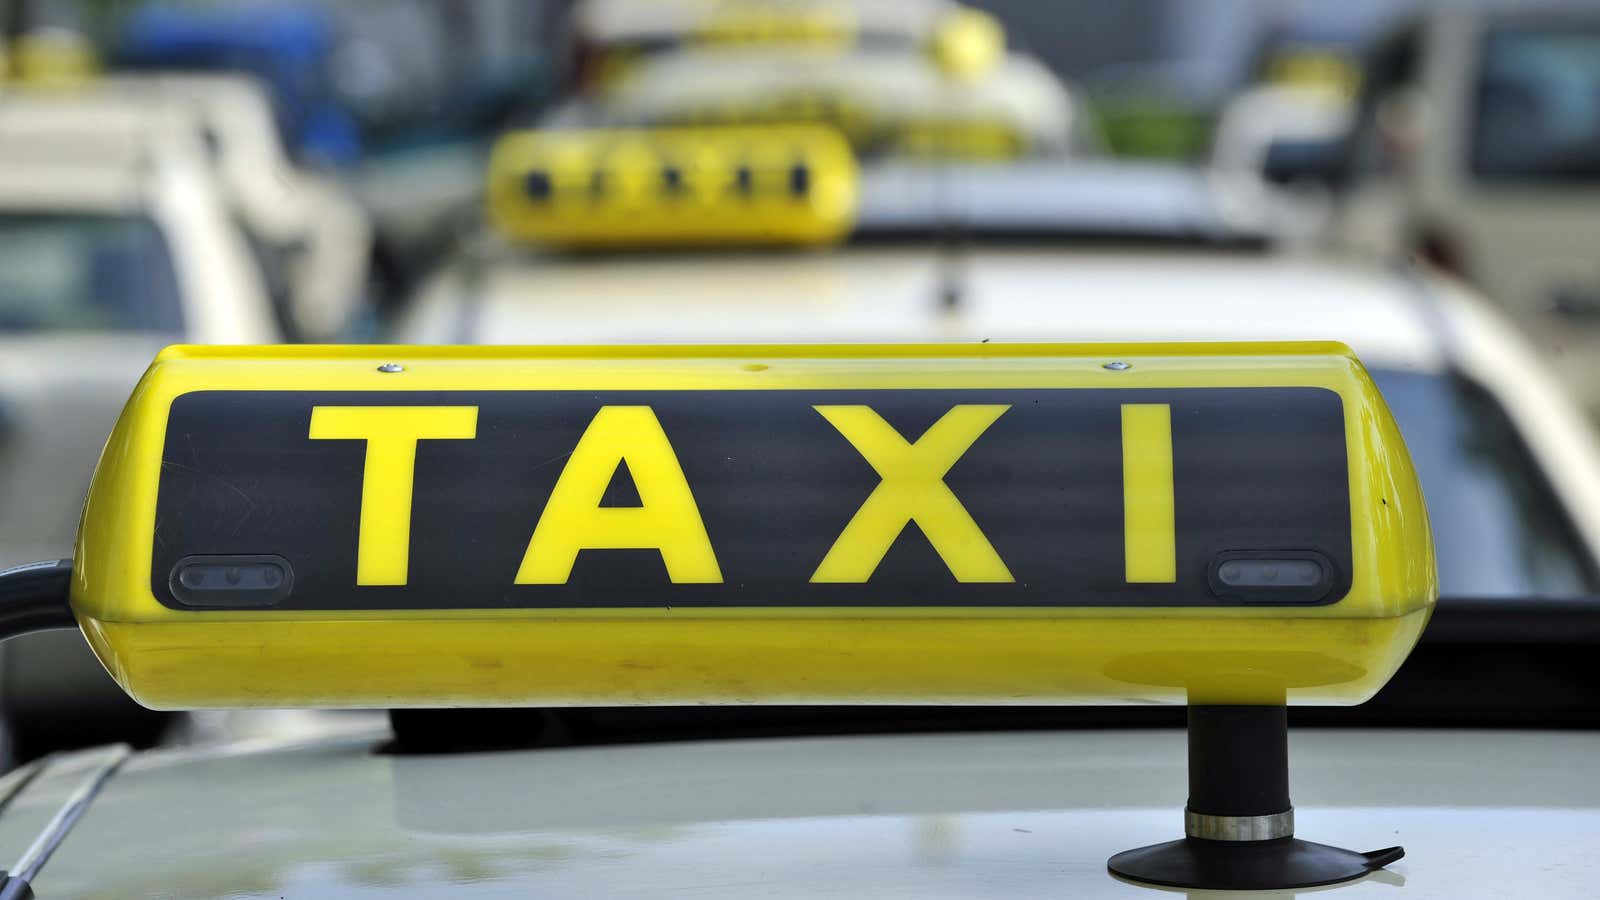 FILE – In this June 15, 2009 file photo taxi cabs are seen at Tegel Airport in Berlin. A court has issued an injunction barring…